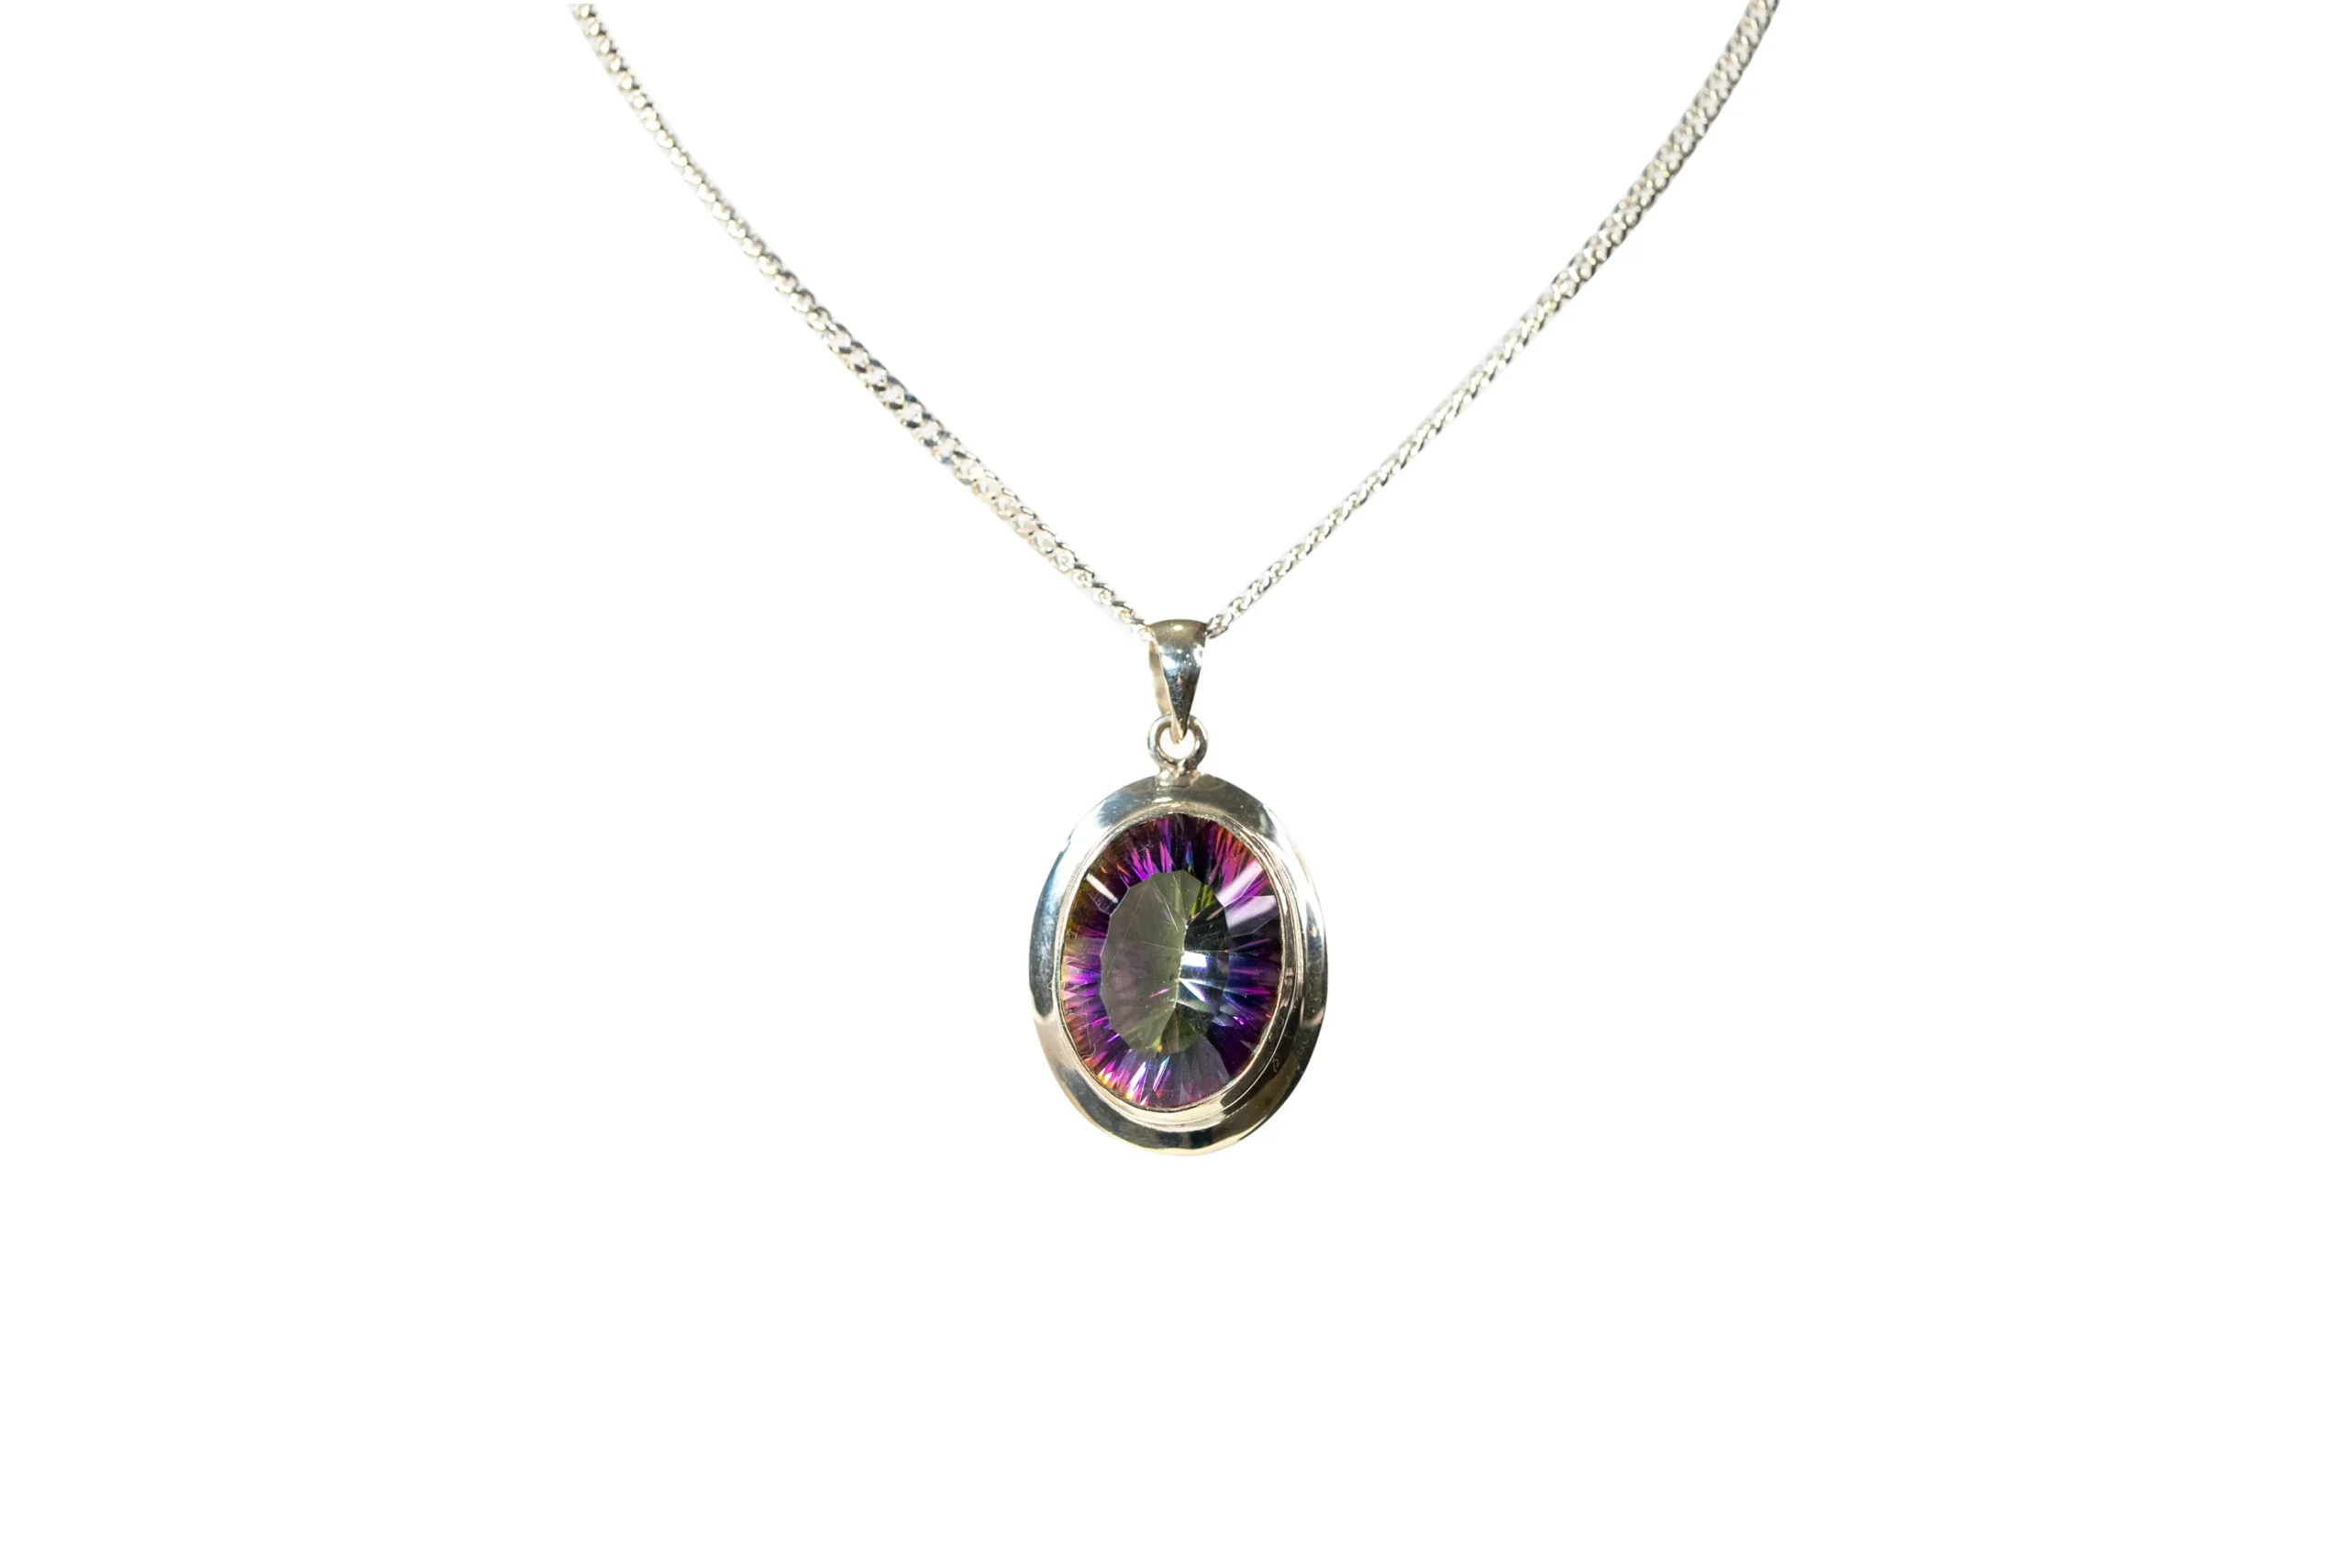 Silver Mystic Topaz Pendant Necklace With Gemstone